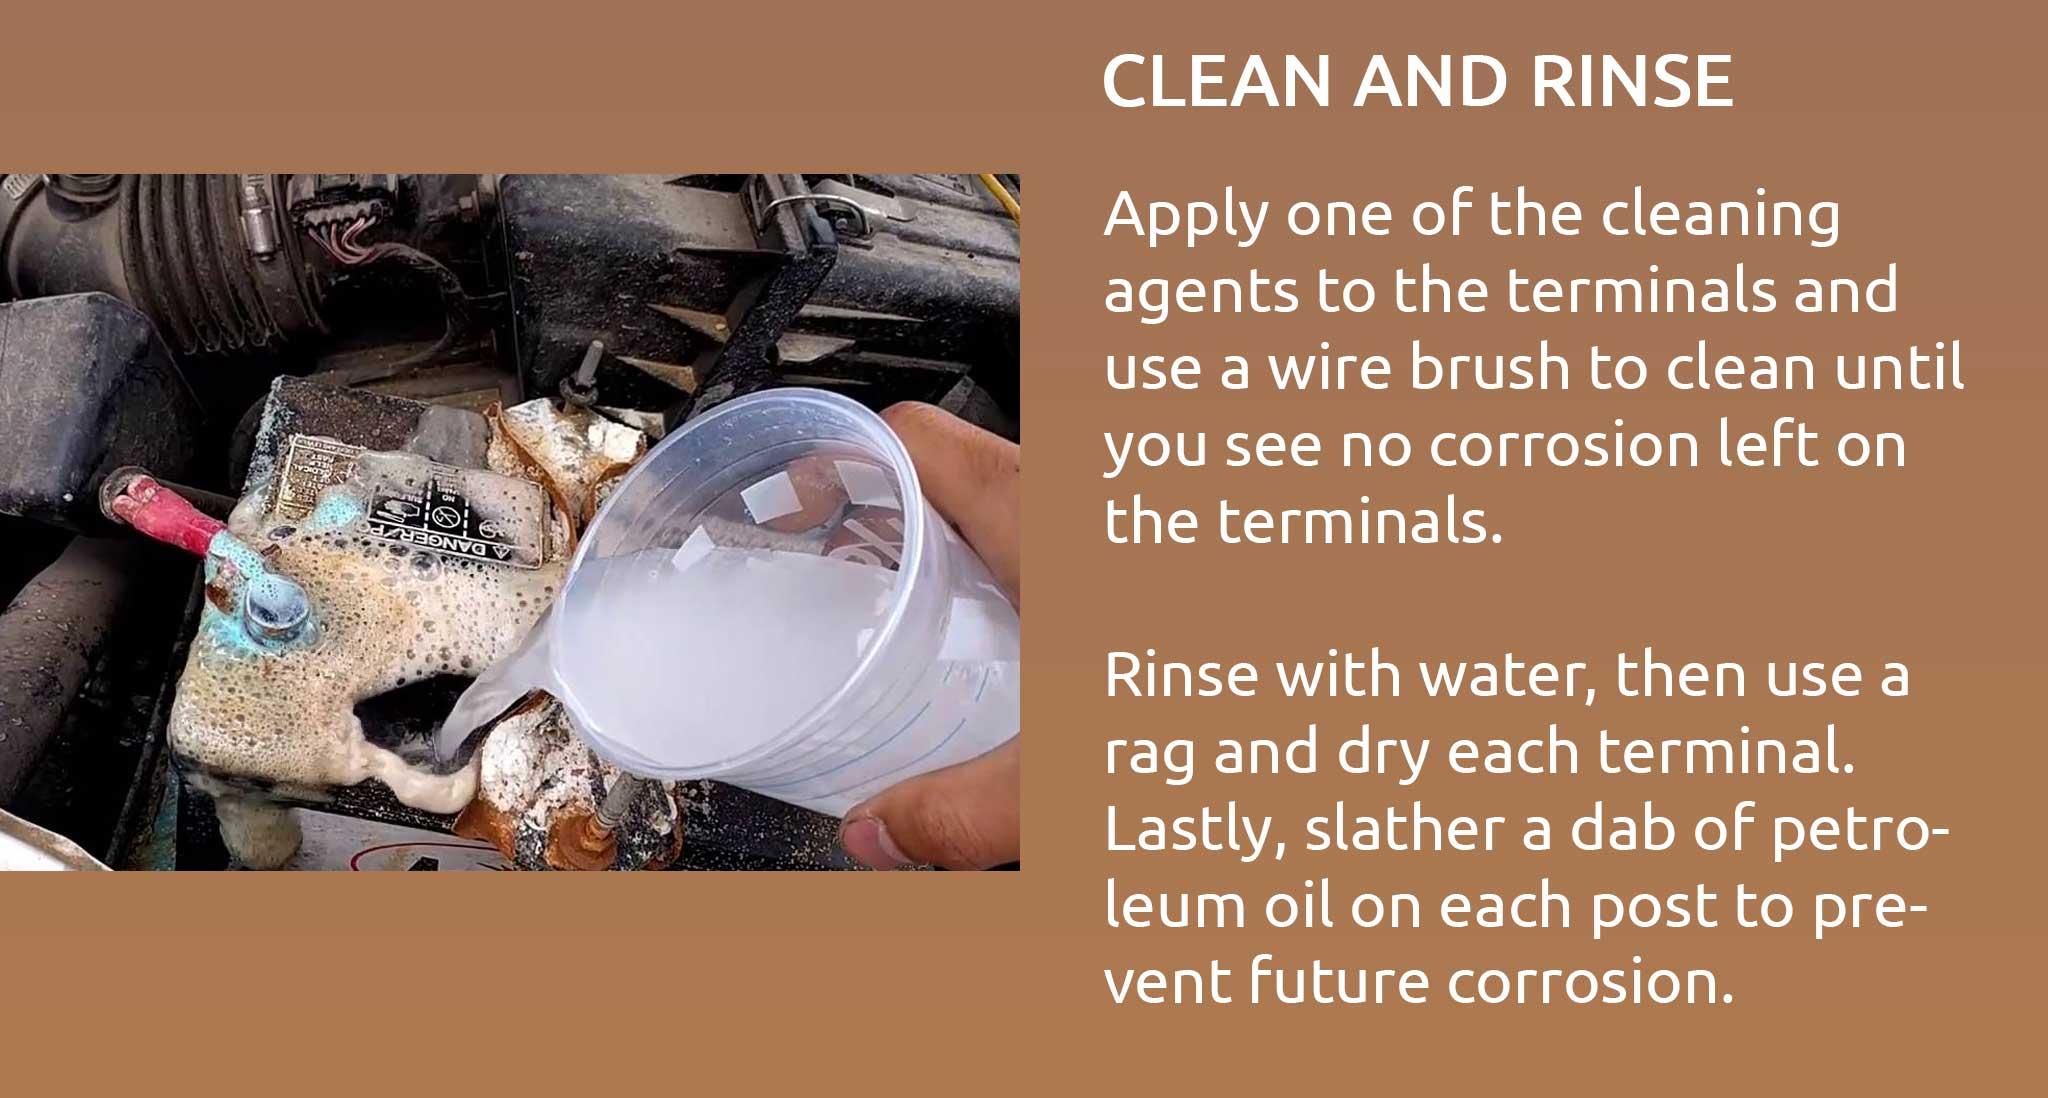 Apply one of the cleaning agents to the terminals and use a wire brush to clean until you see no corrosion left on the terminals.  Rinse with water, then use a rag and dry each terminal. Lastly, slather a dab of petroleum oil on each post to prevent future corrosion.